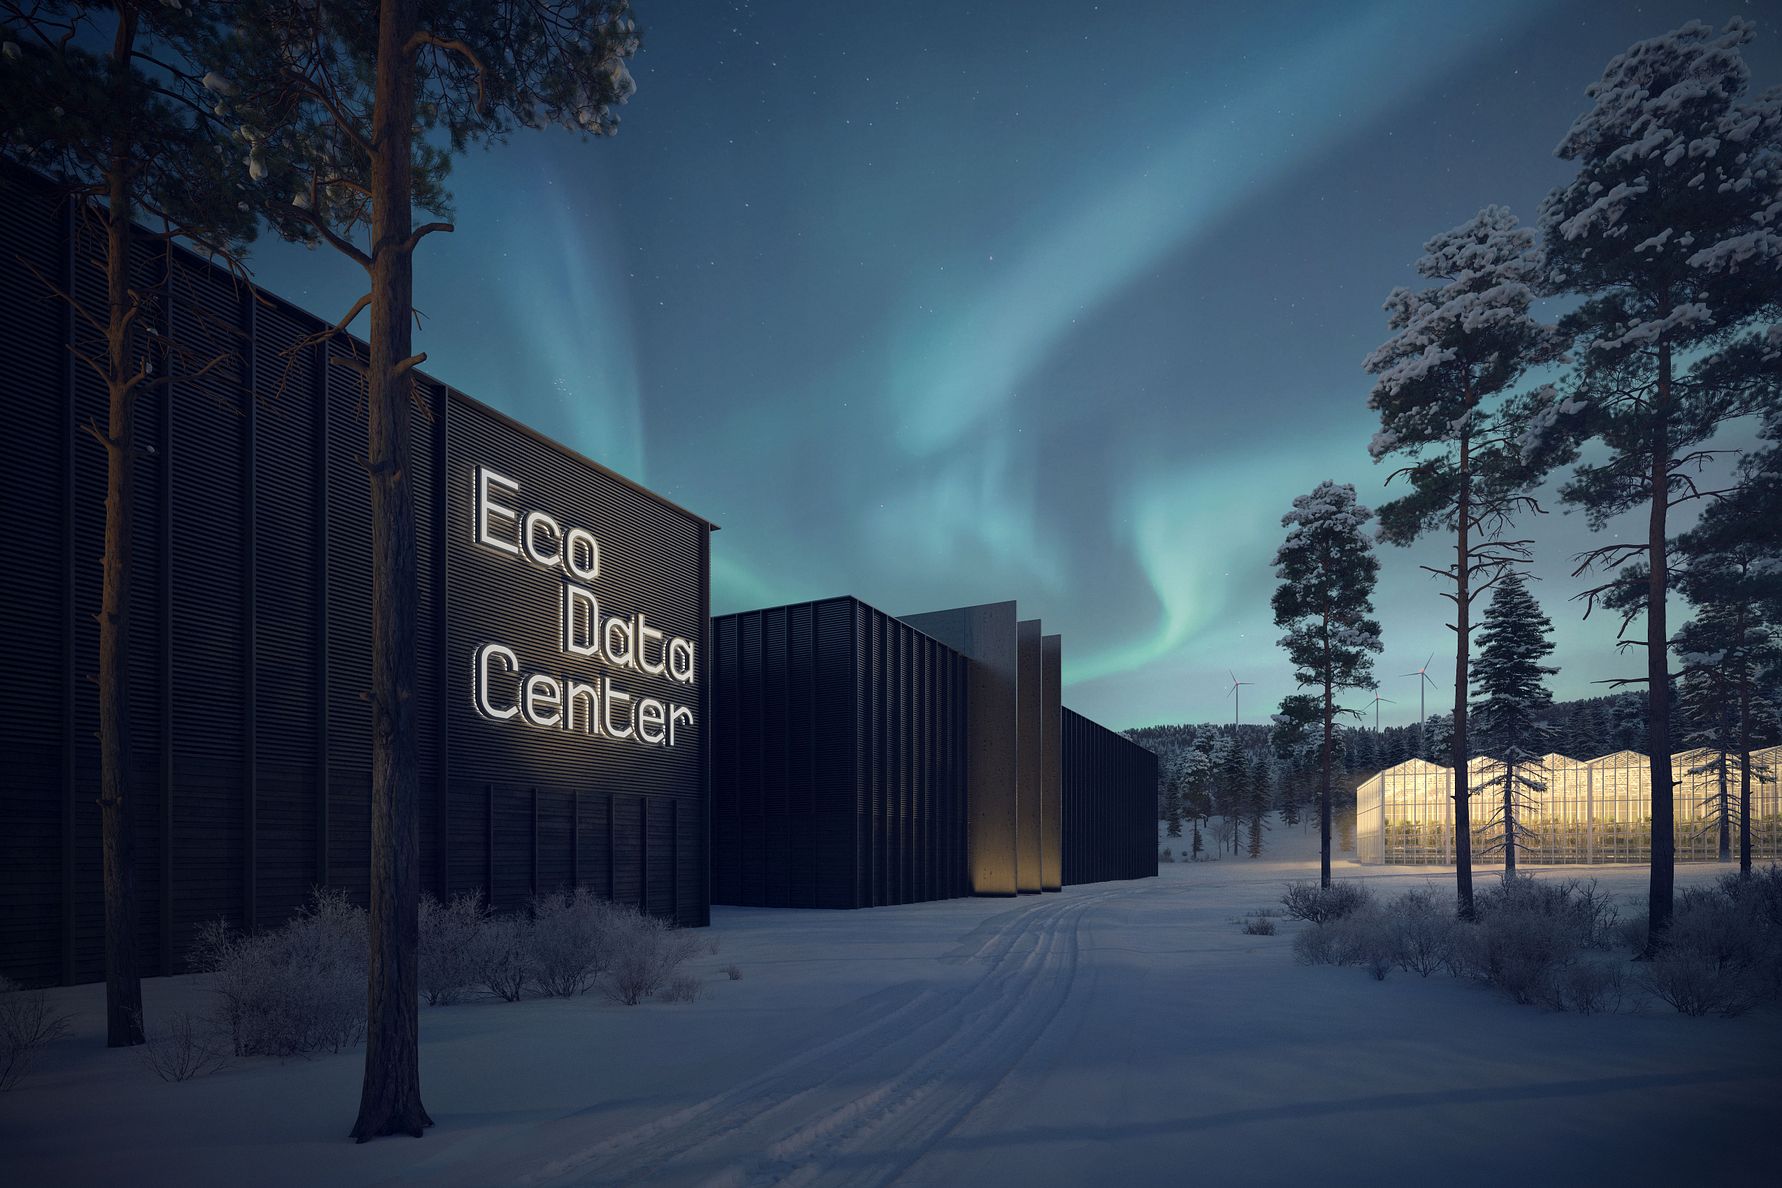 Sweden leads the way to more sustainable data centers